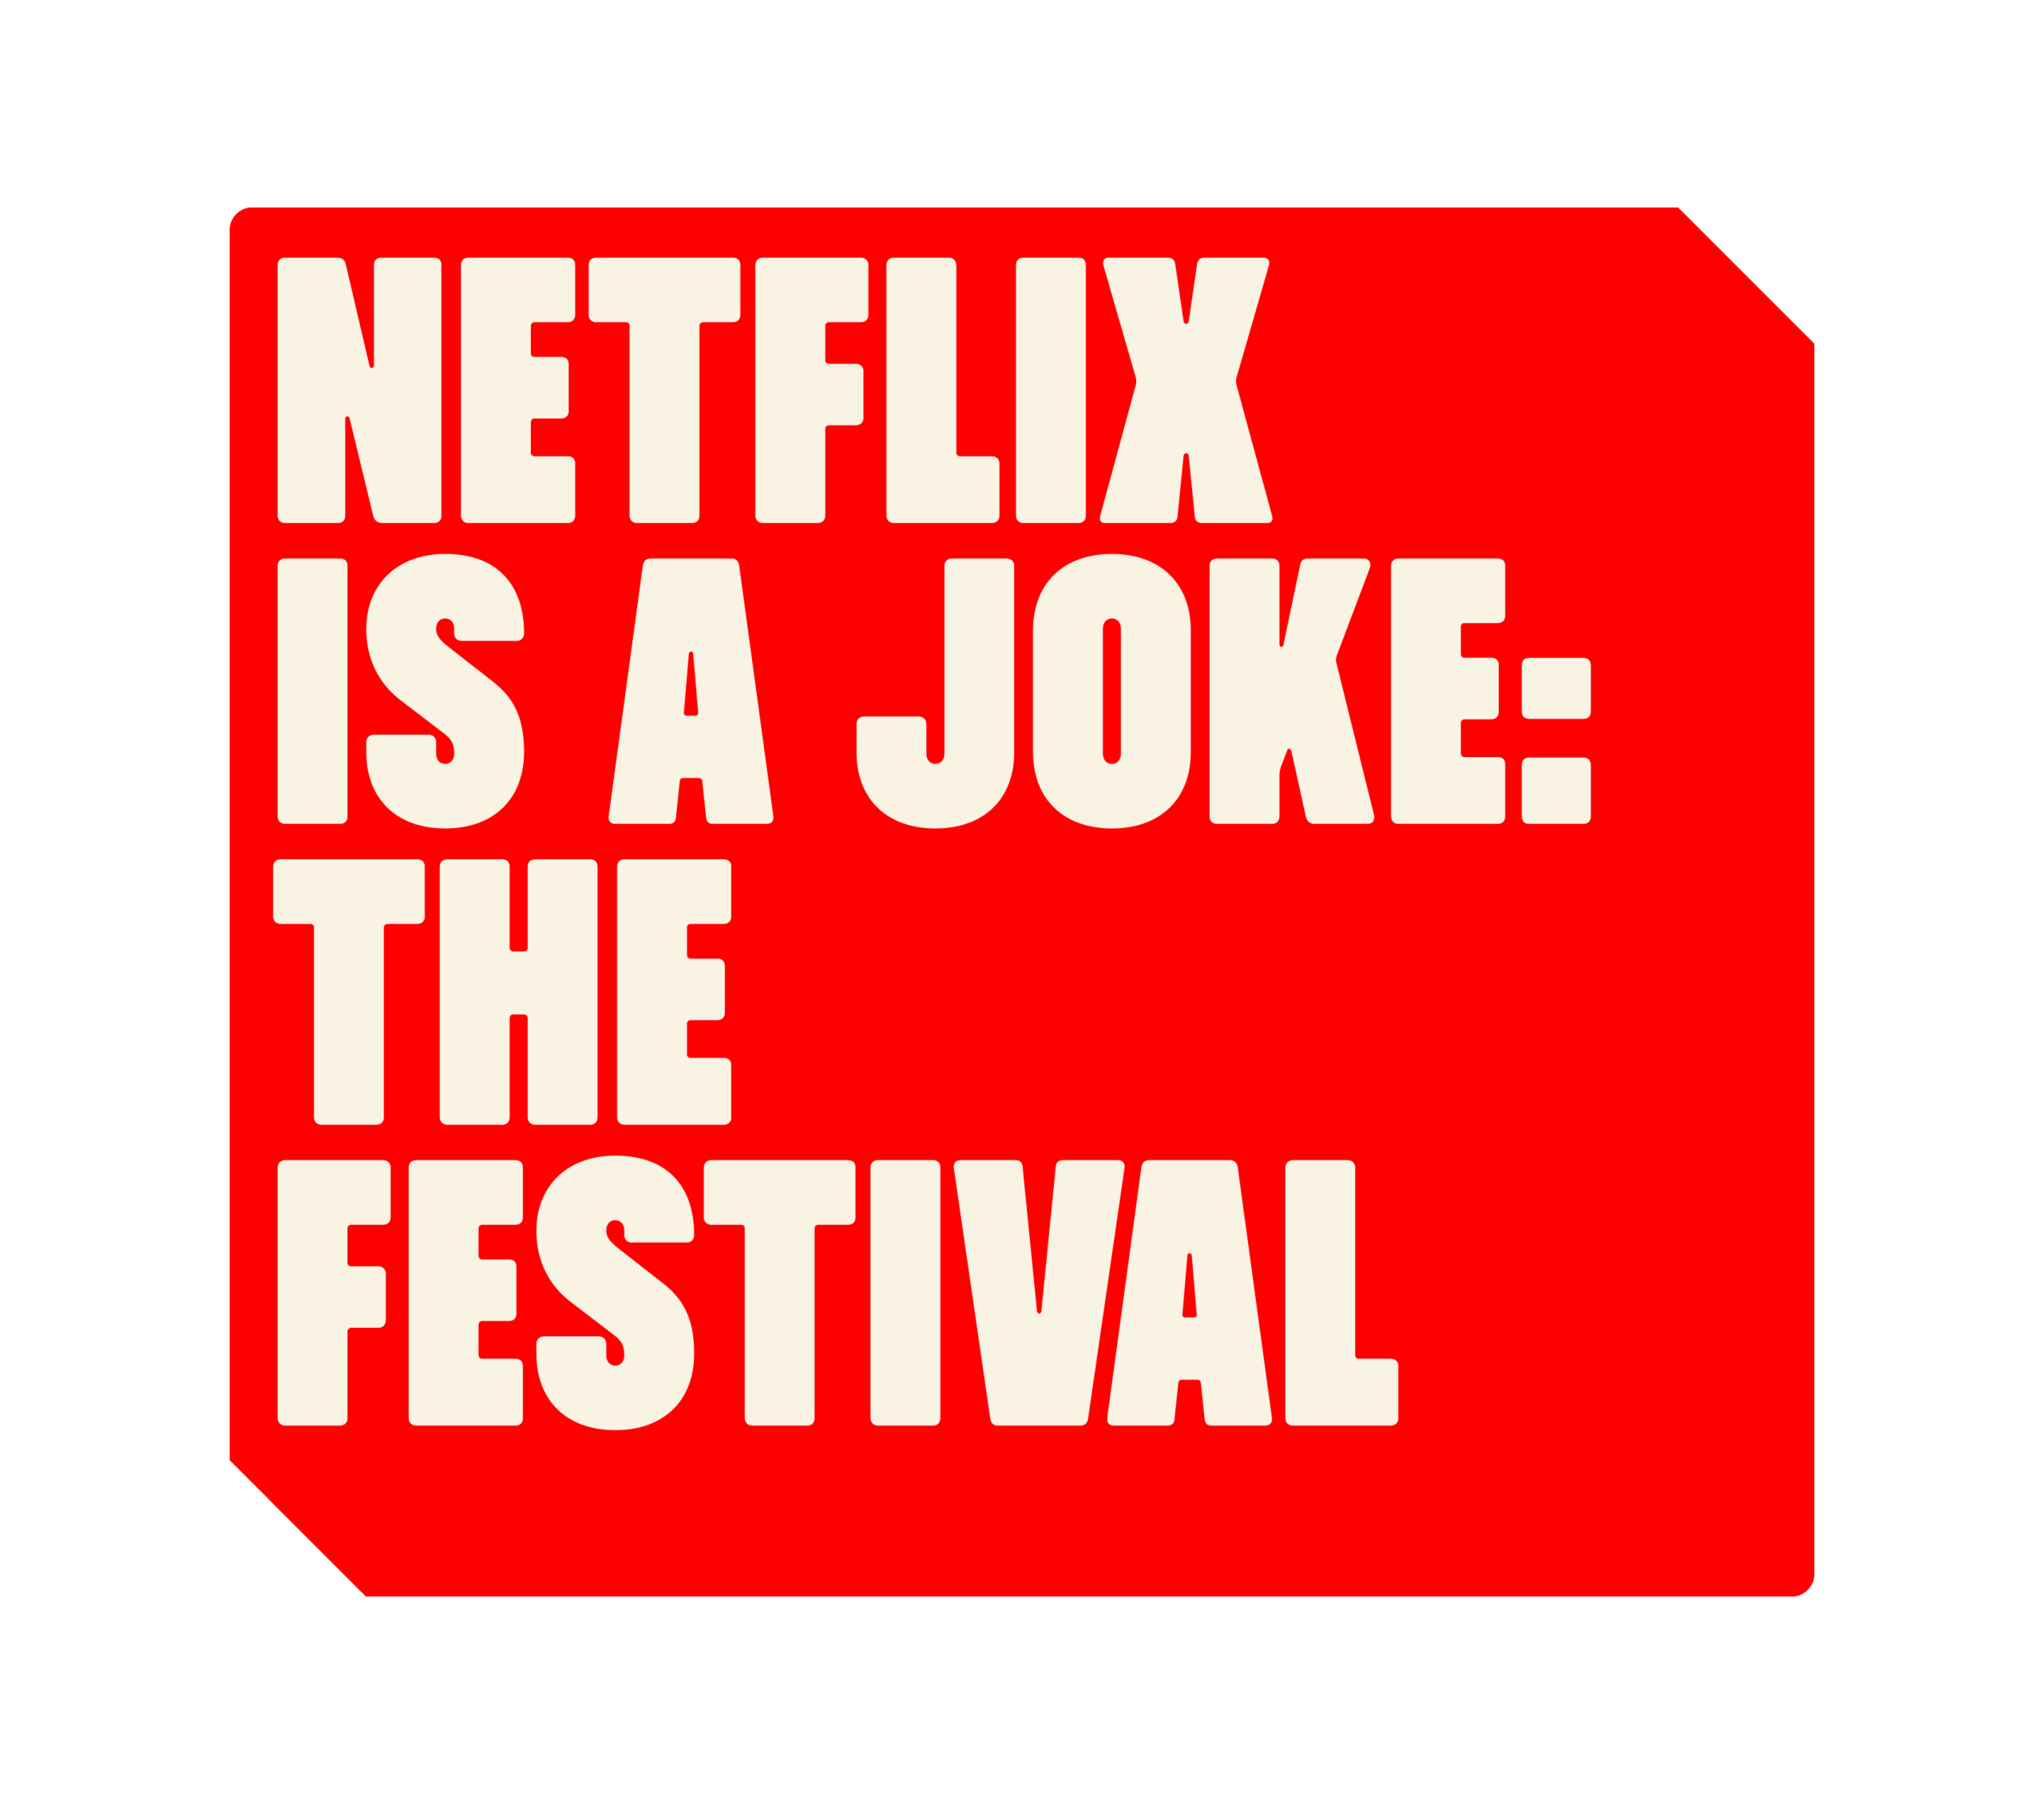 "Live from Last Night" at Netflix Is a Joke: The Festival | Exclusive Clip and Photos - FINAL WEEKEND